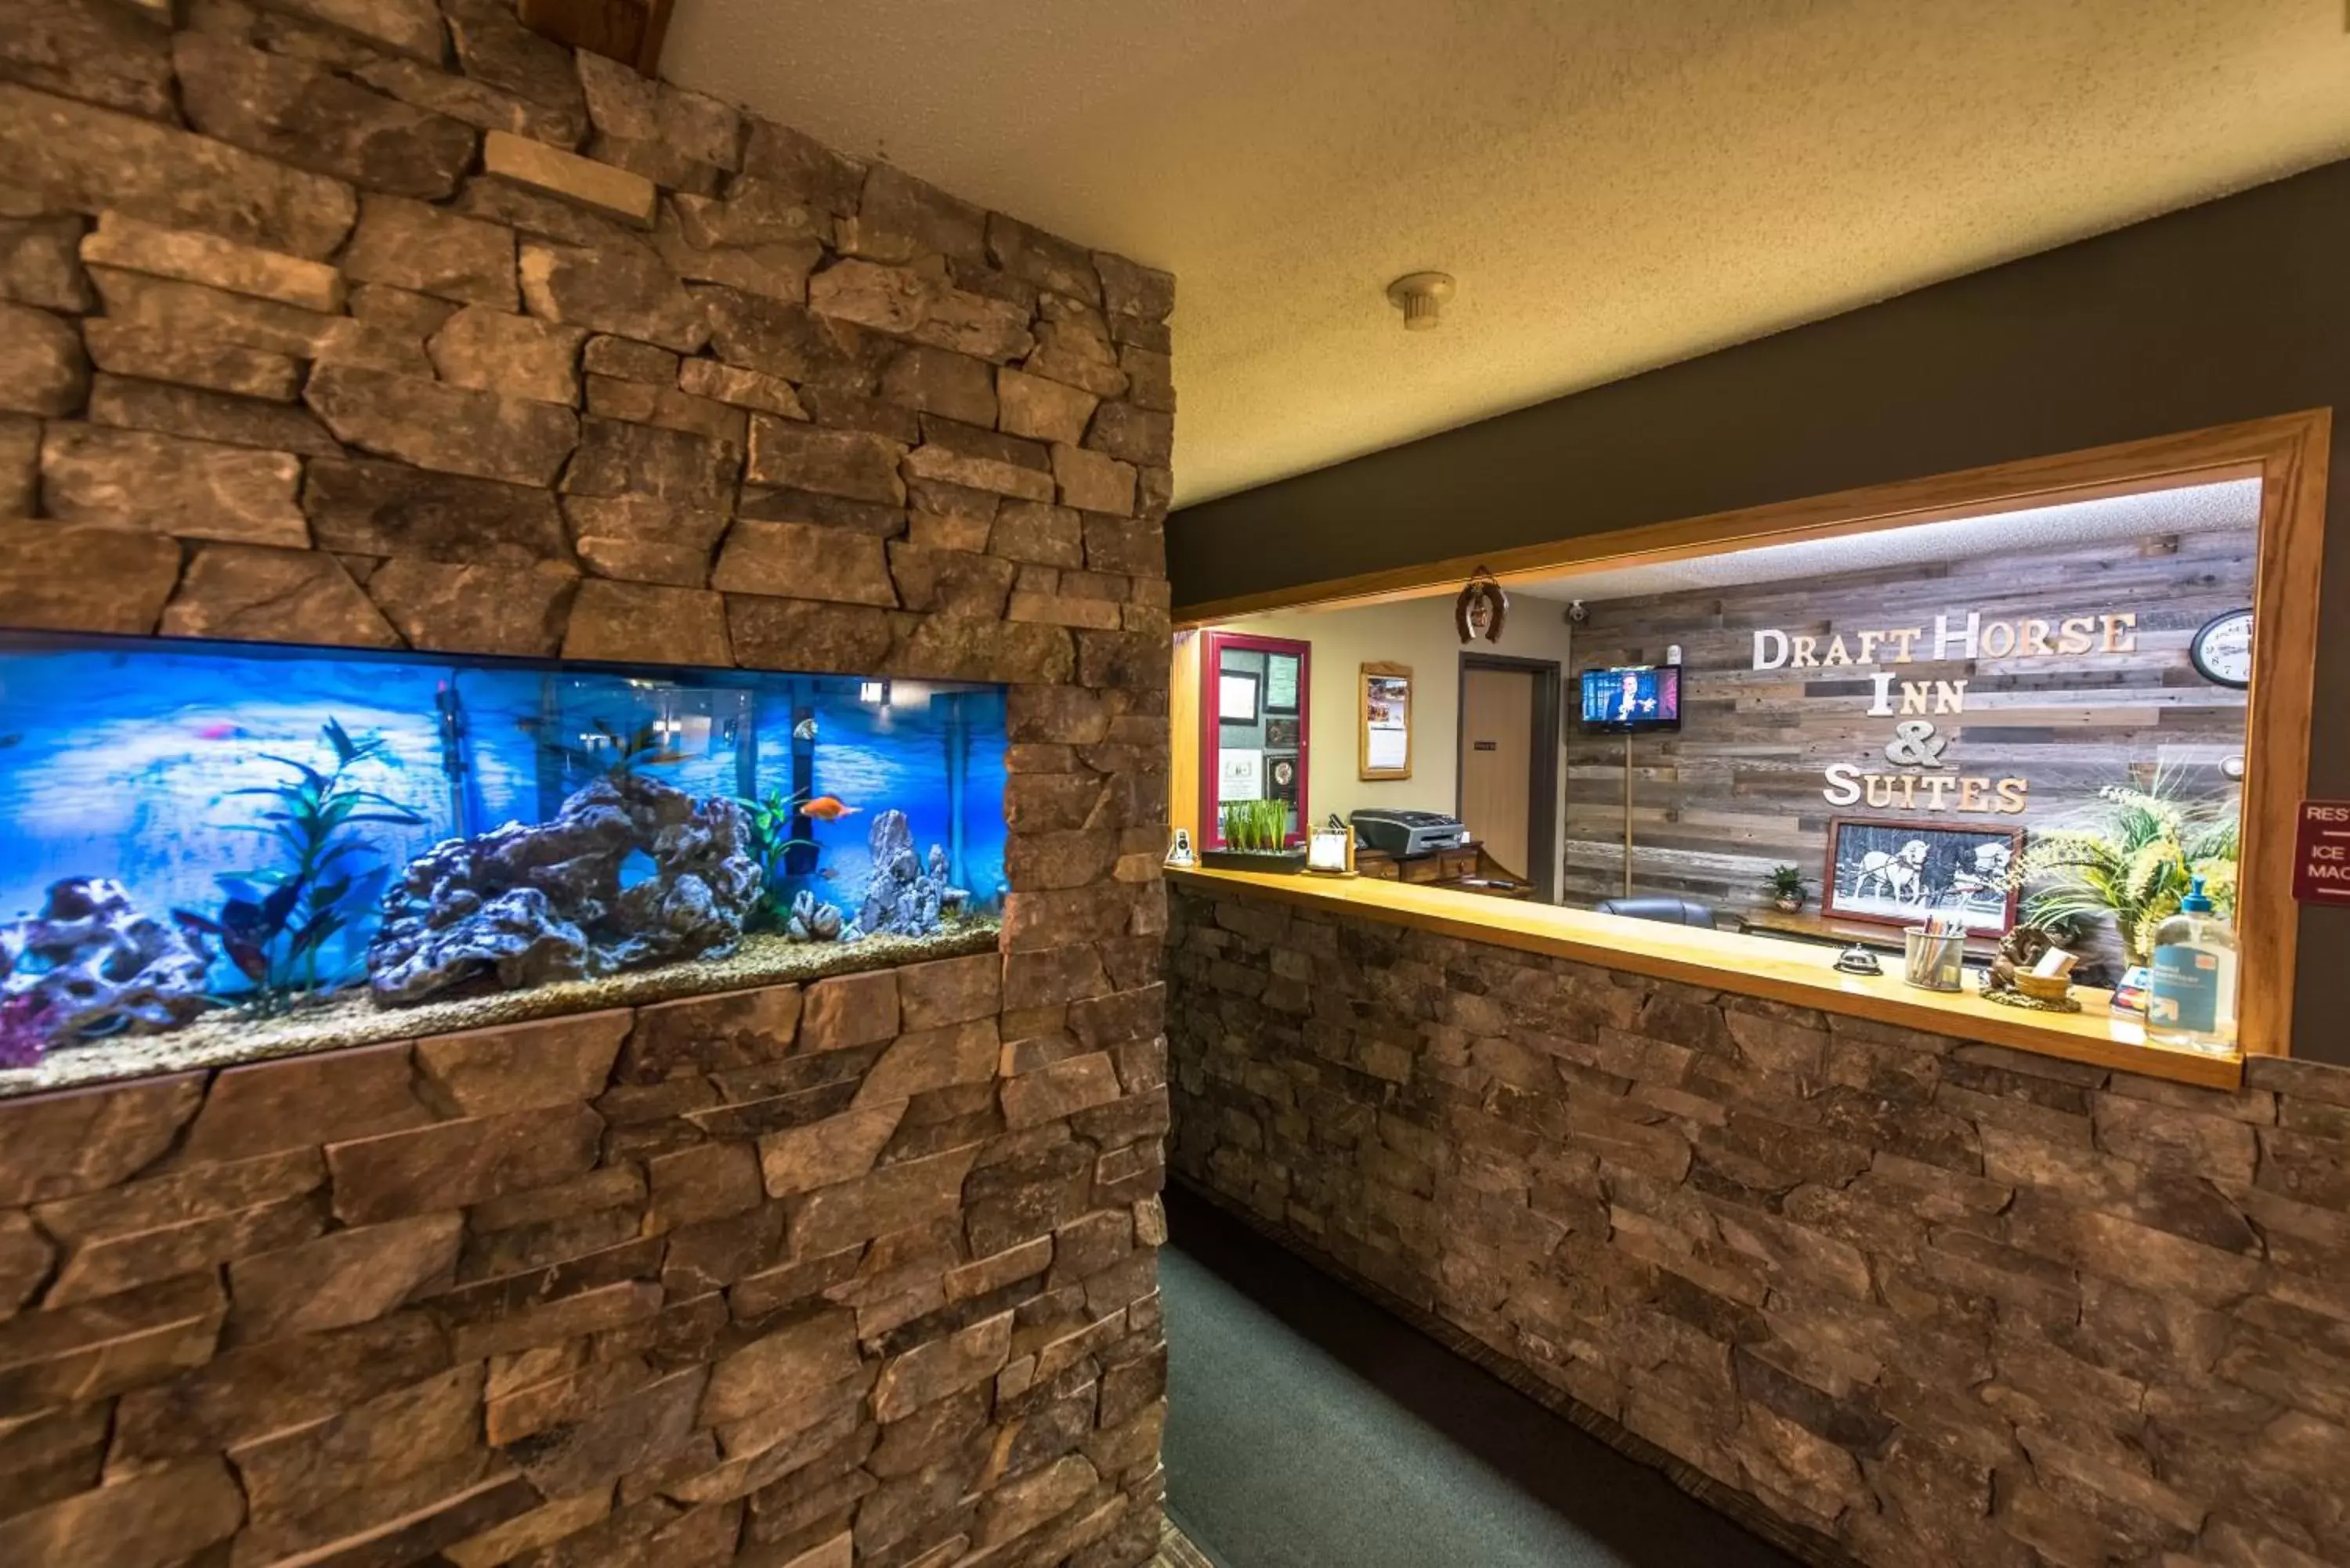 Lobby or reception, Lobby/Reception in Draft Horse Inn and Suites